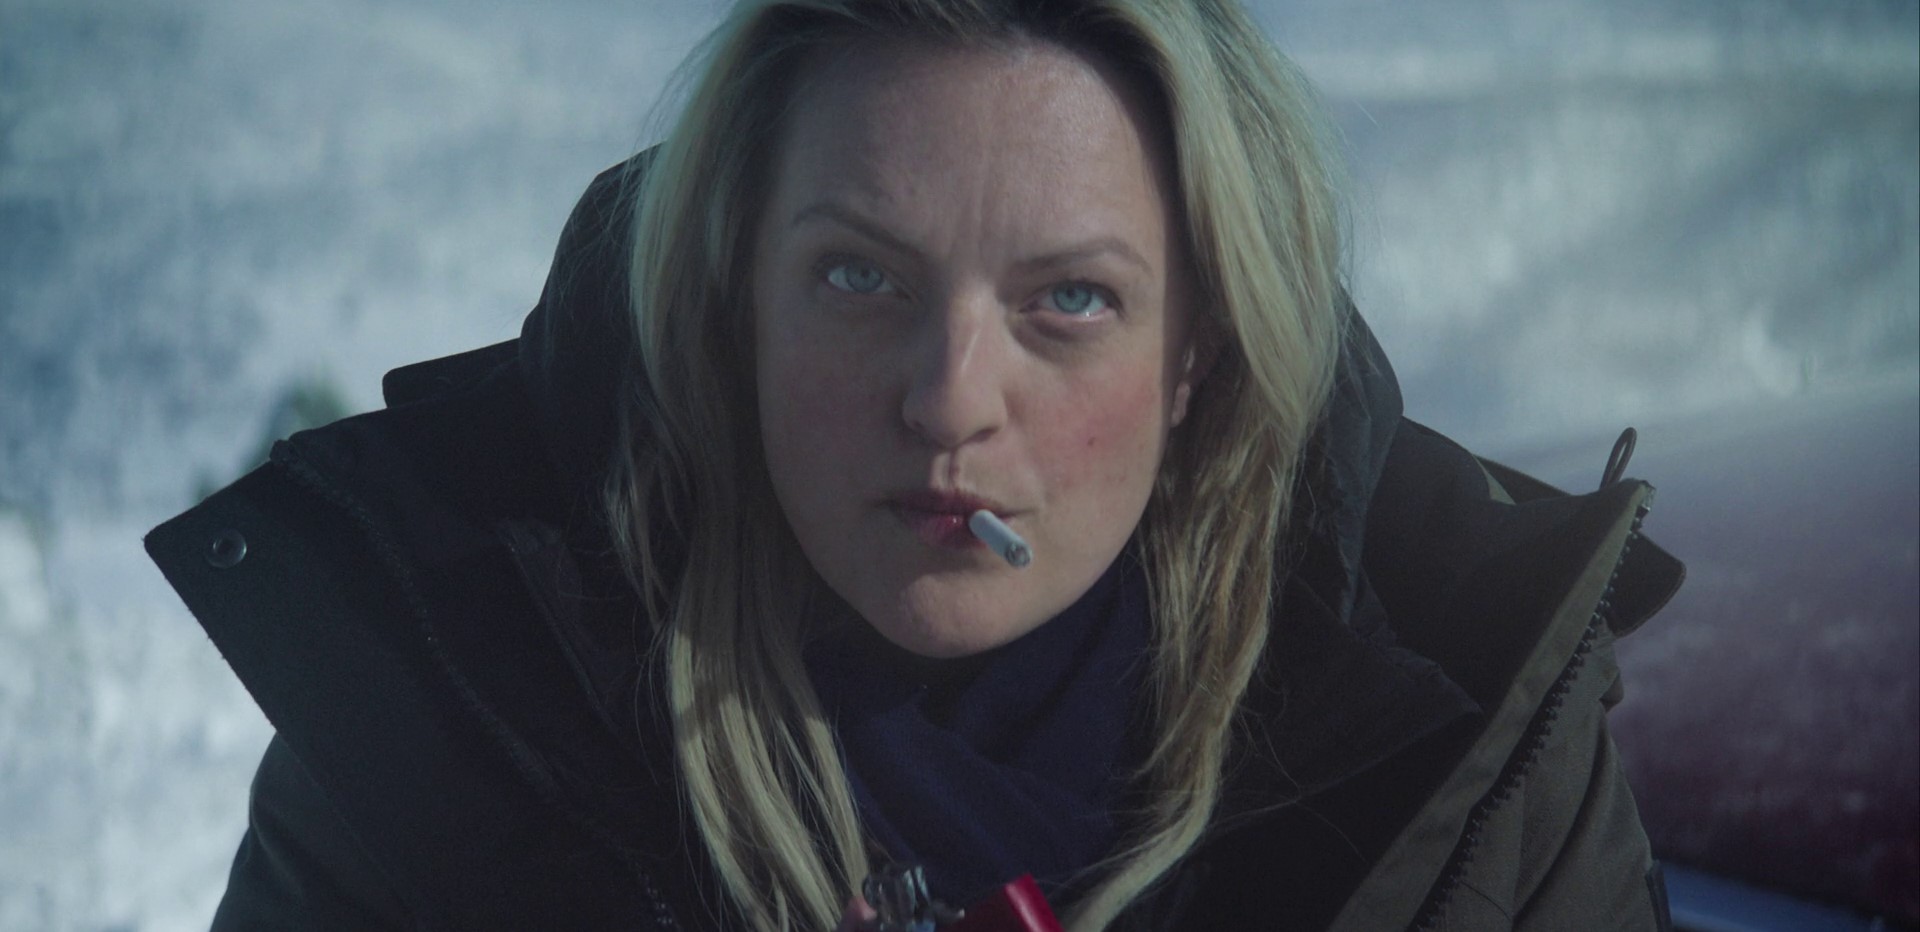 Does Elisabeth Moss Smoke in Real Life?